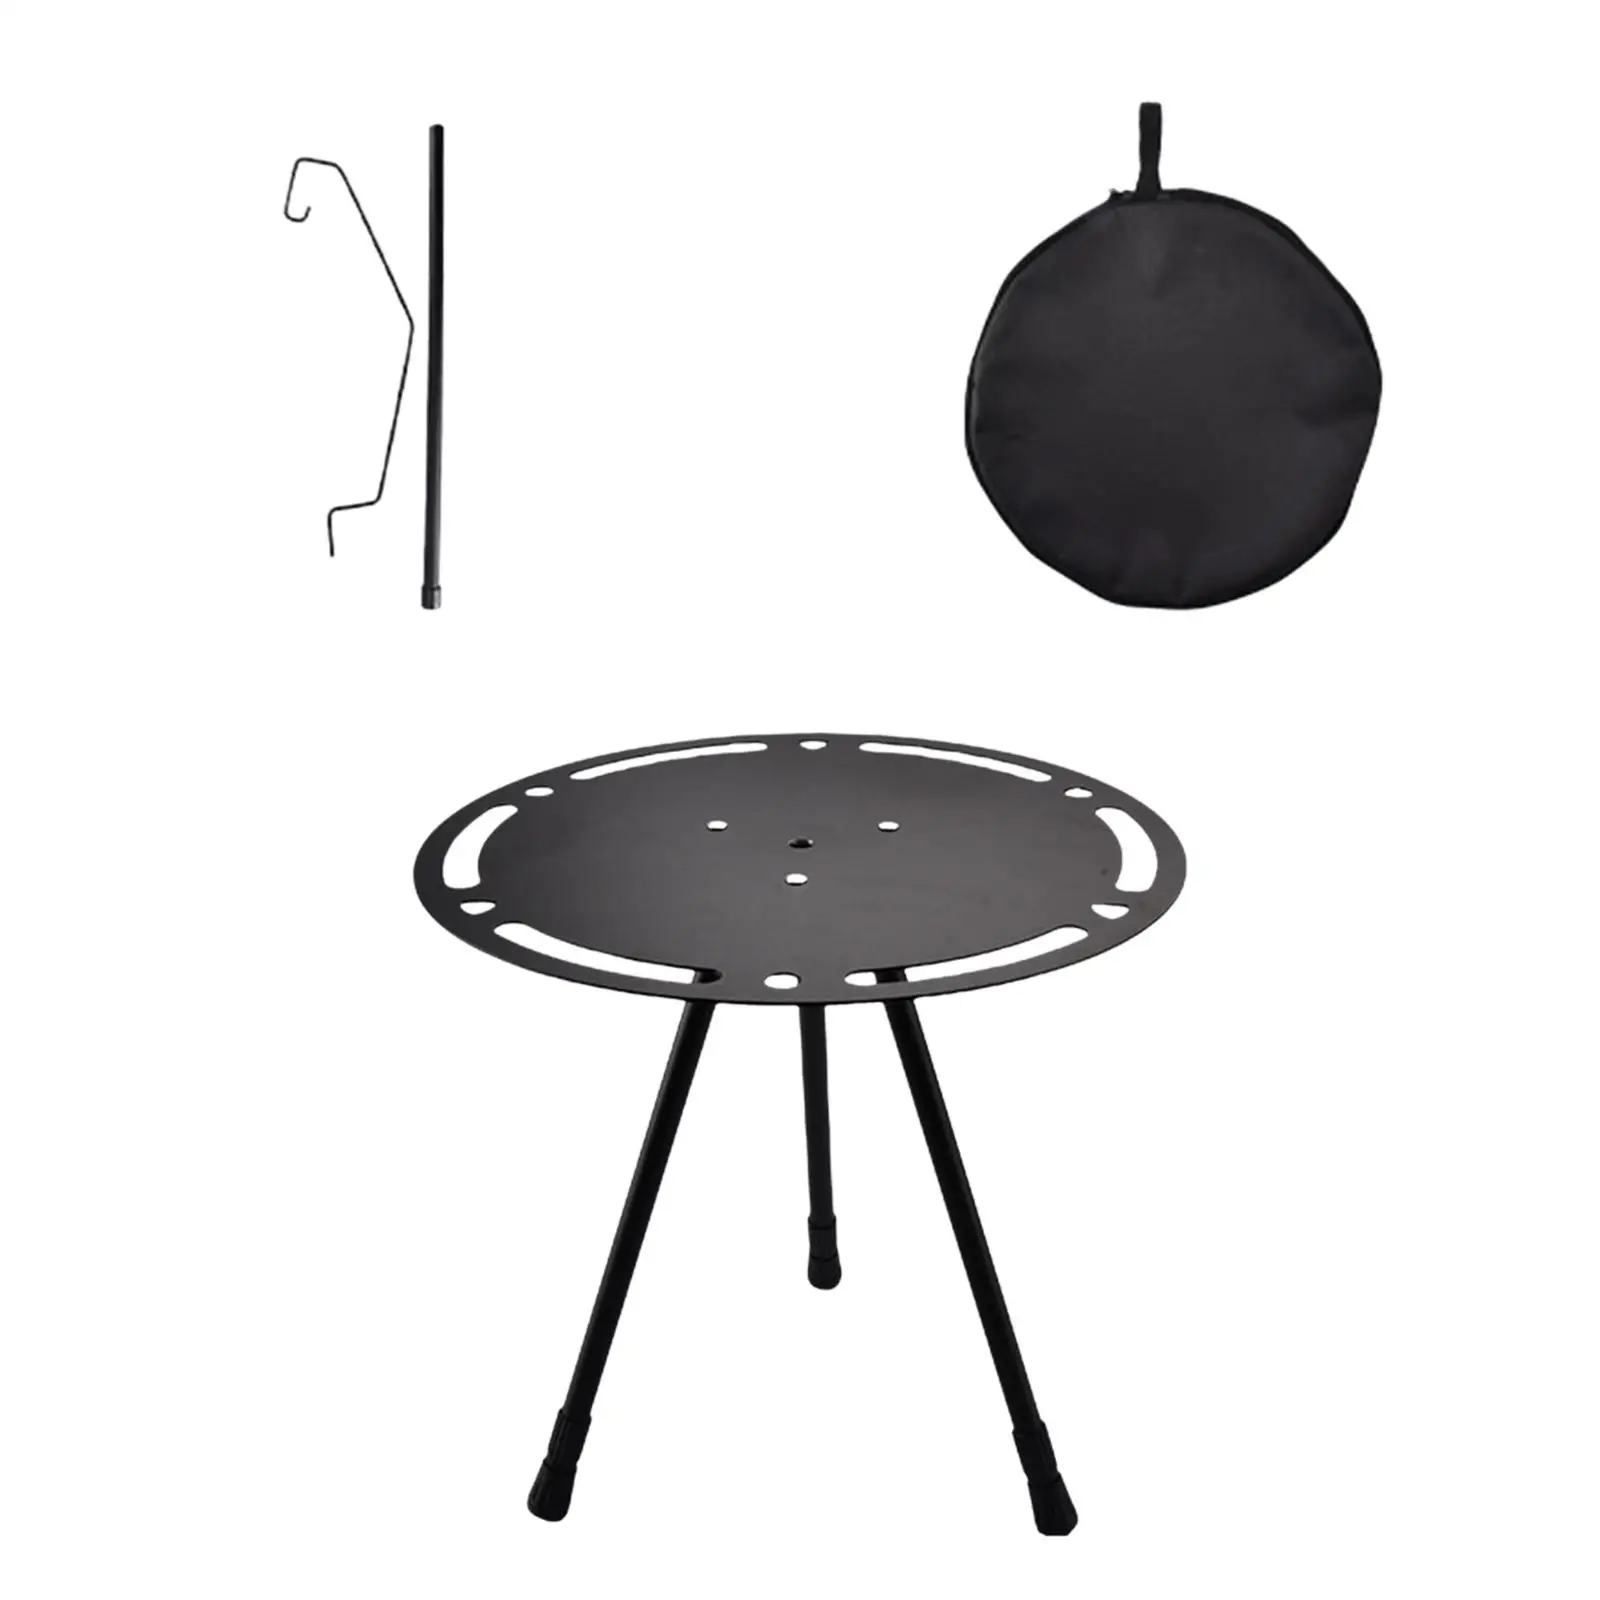 Portable Table Retractable Legs Aluminum Alloy Round Camping Side Table for Travel Picnic Outdoor Garden Camping